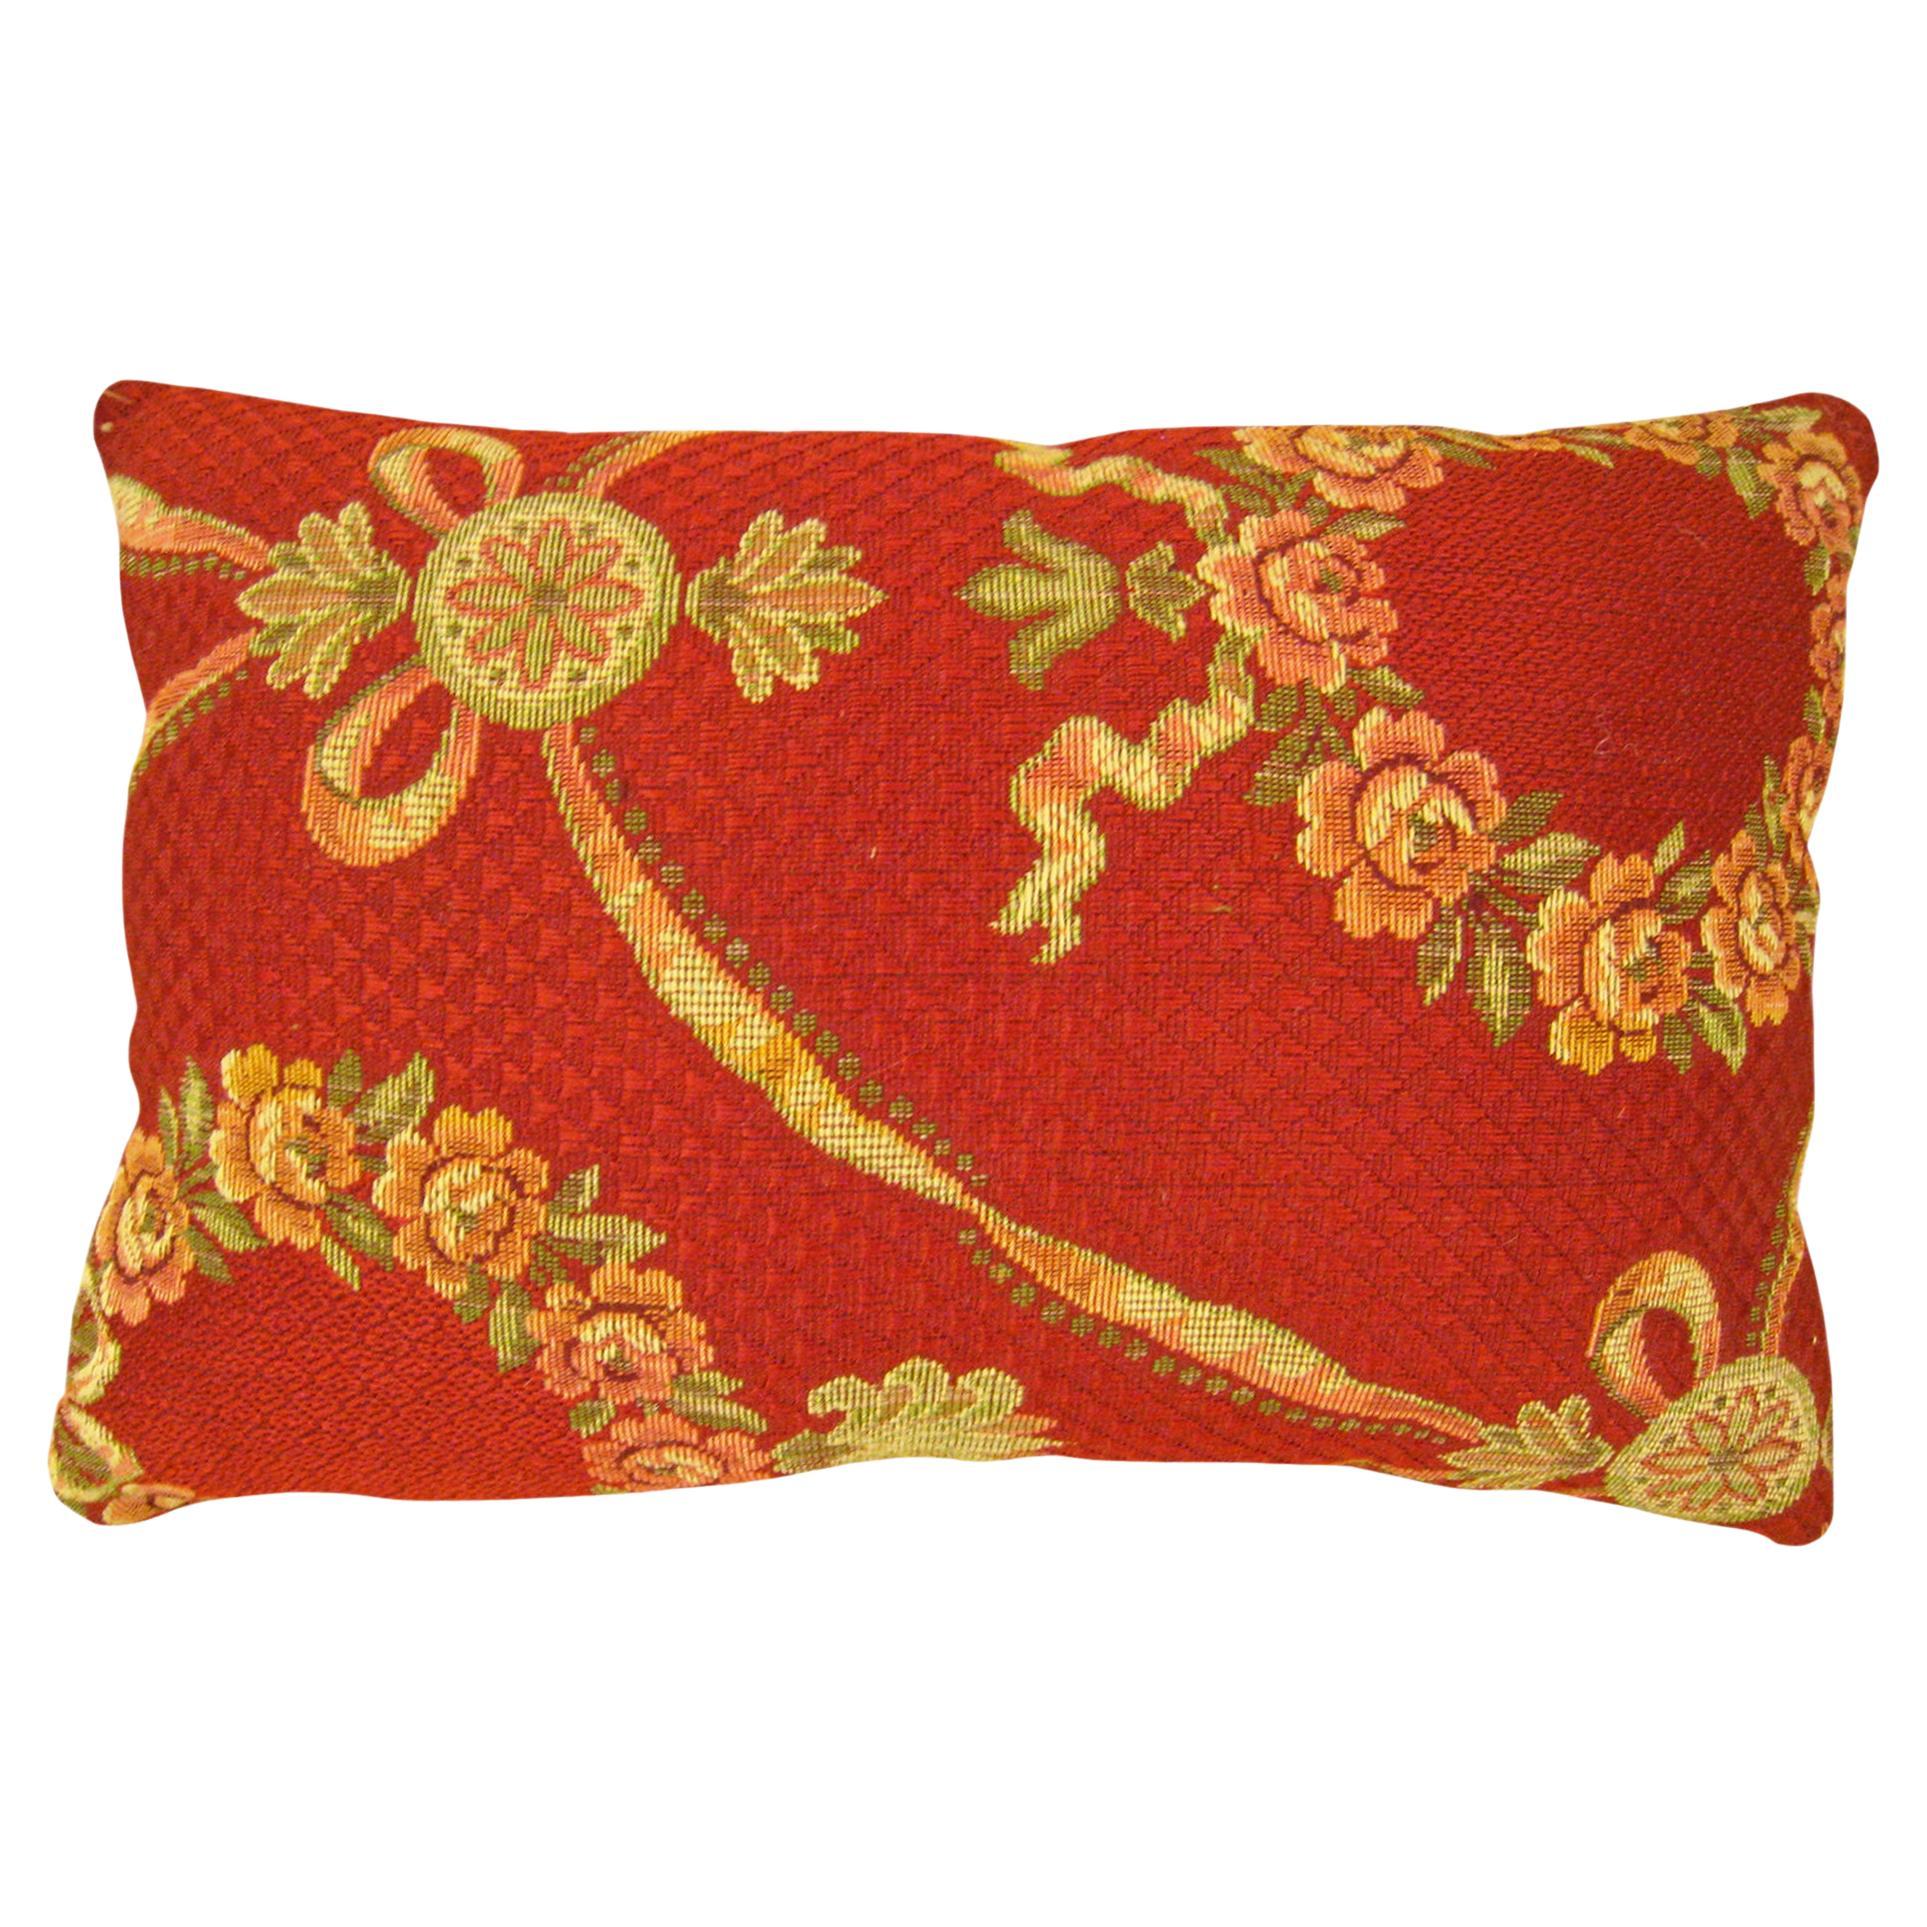 Decorative Antique Jacquard Tapestry Pillow with Floral Elements Allover For Sale